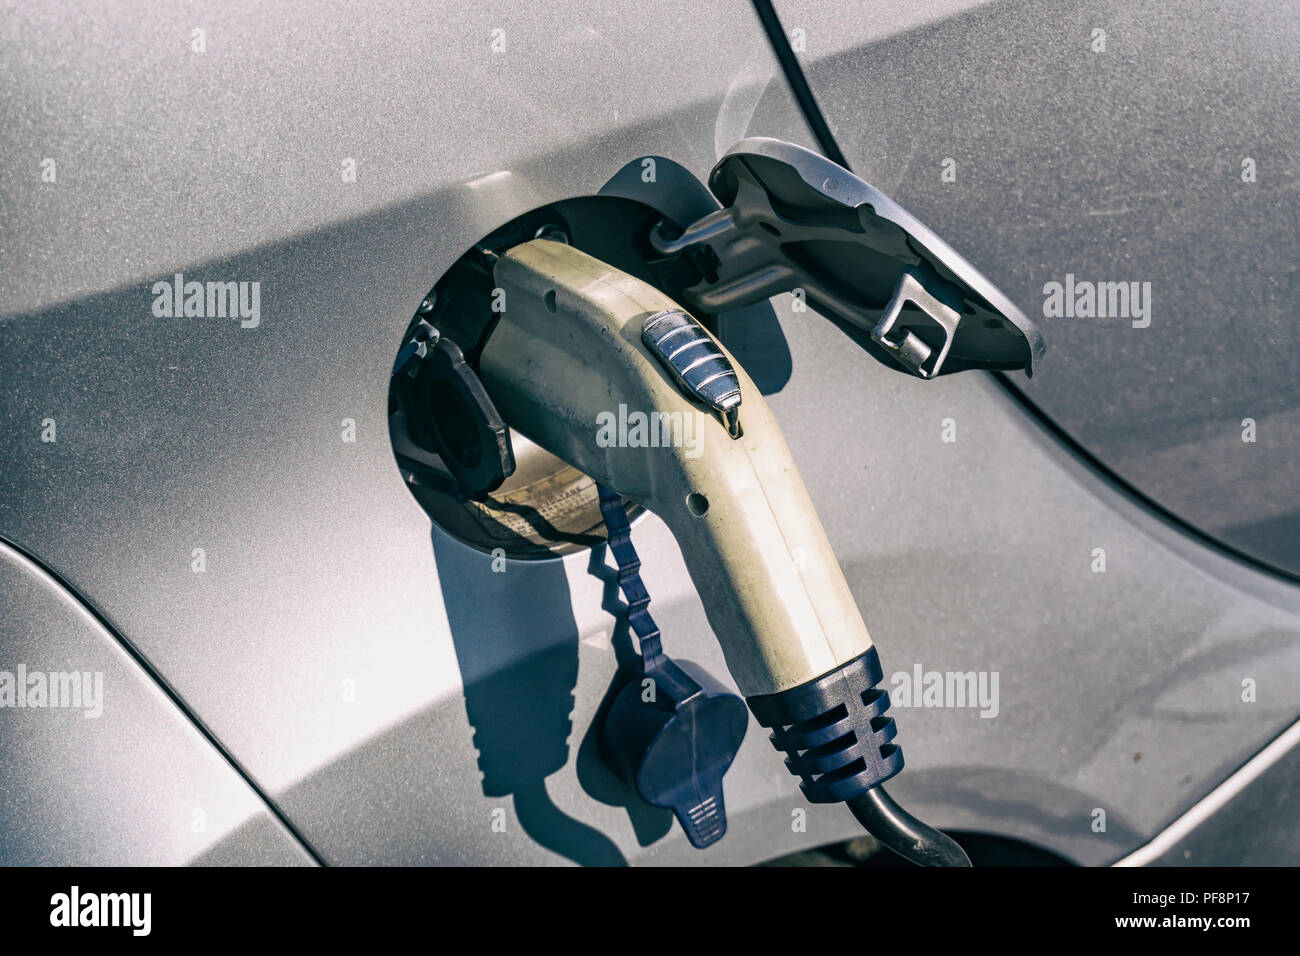 Berlin, Germany, August 02, 2018: Close-Up of Electric Car Plug-In Charger Stock Photo